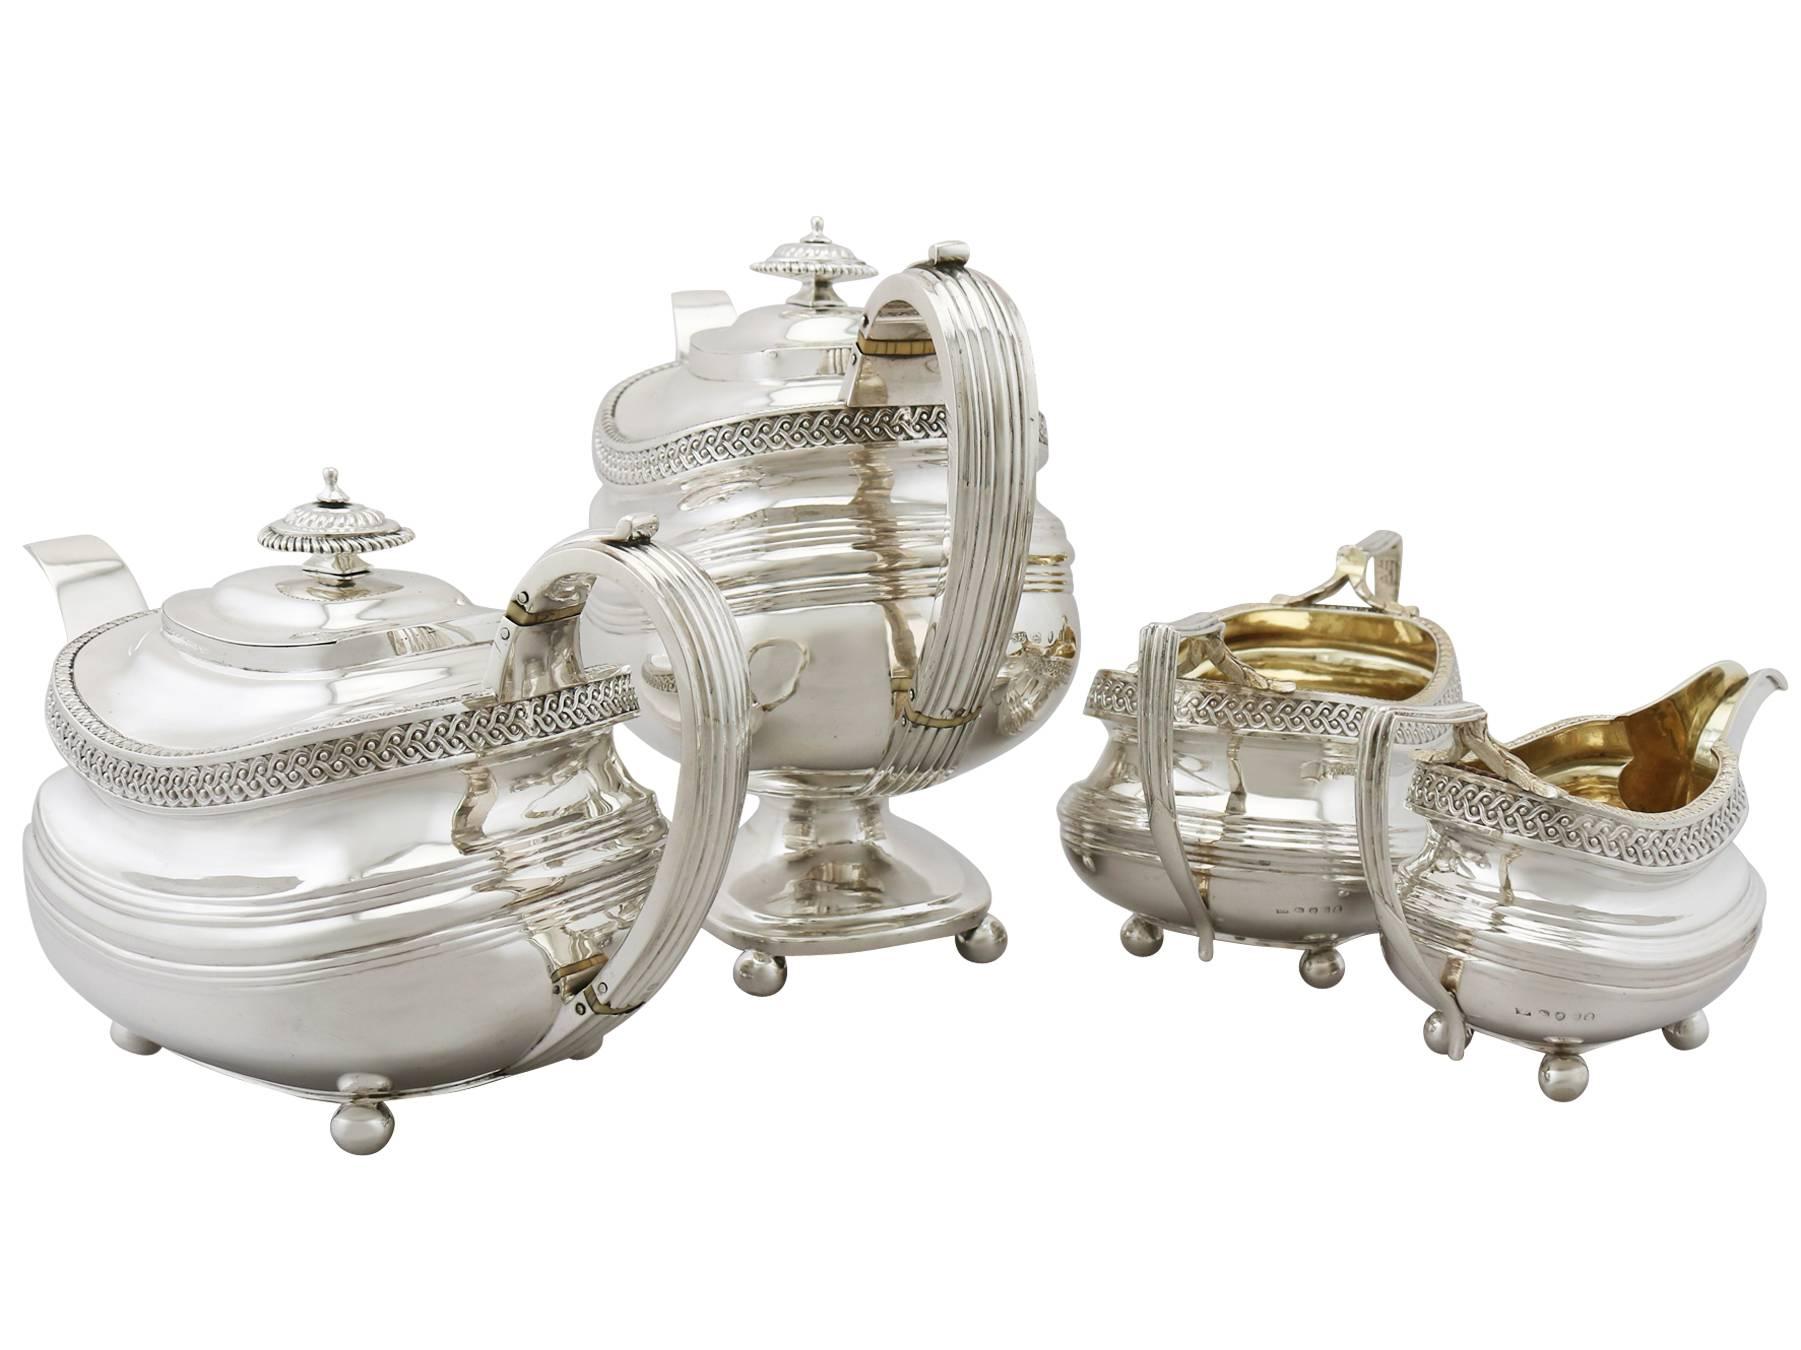 An exceptional, fine and impressive antique Georgian English sterling silver four-piece tea and coffee set/service; part of our silver teaware collection.

This exceptional antique George III English sterling silver four piece tea and coffee set